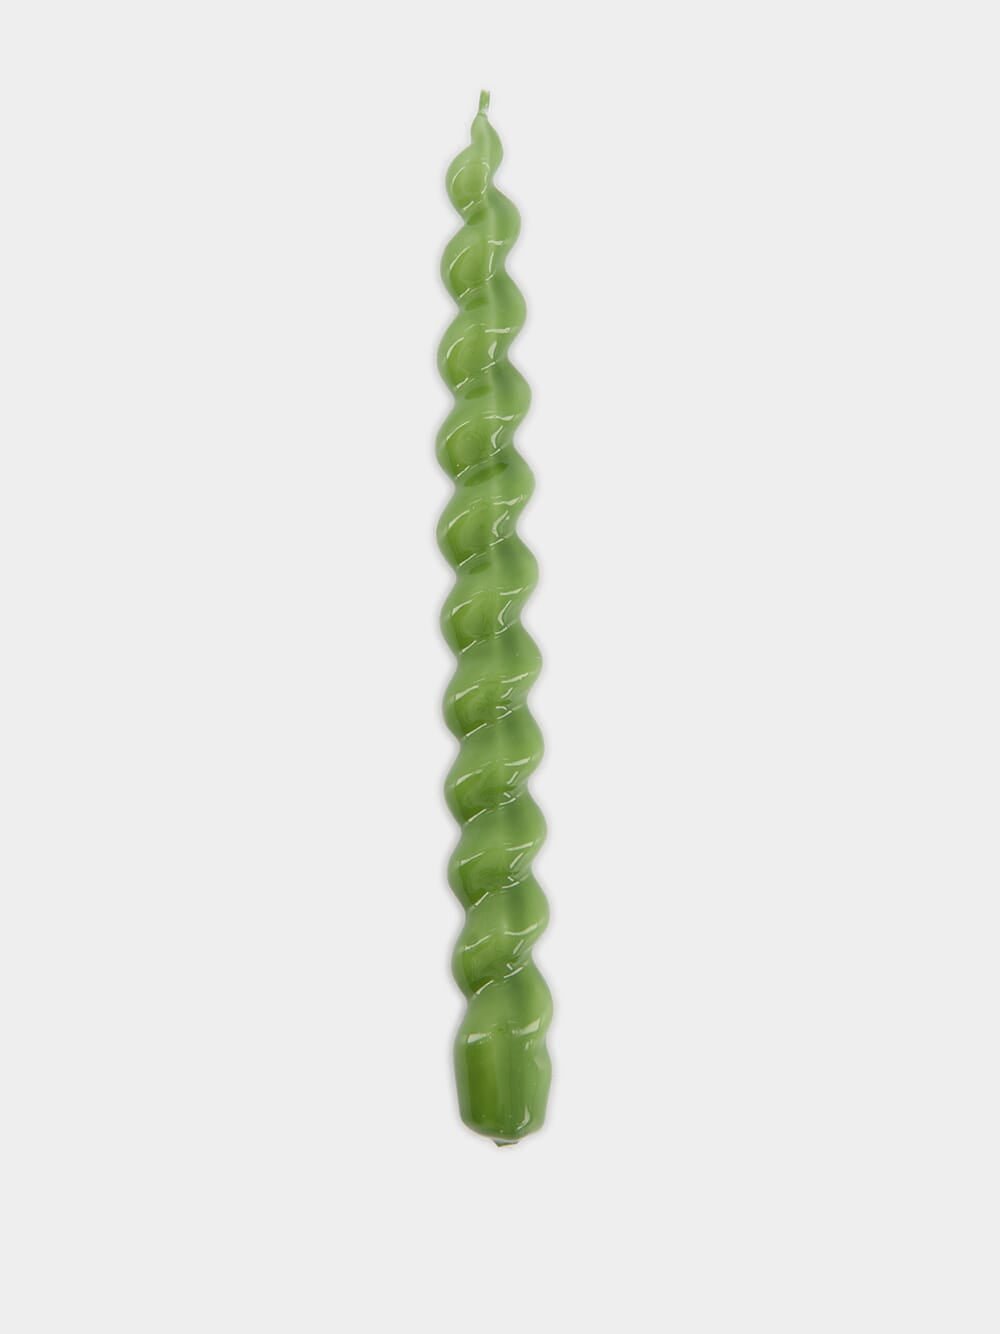 CerabellaSpiral Green Candle at Fashion Clinic